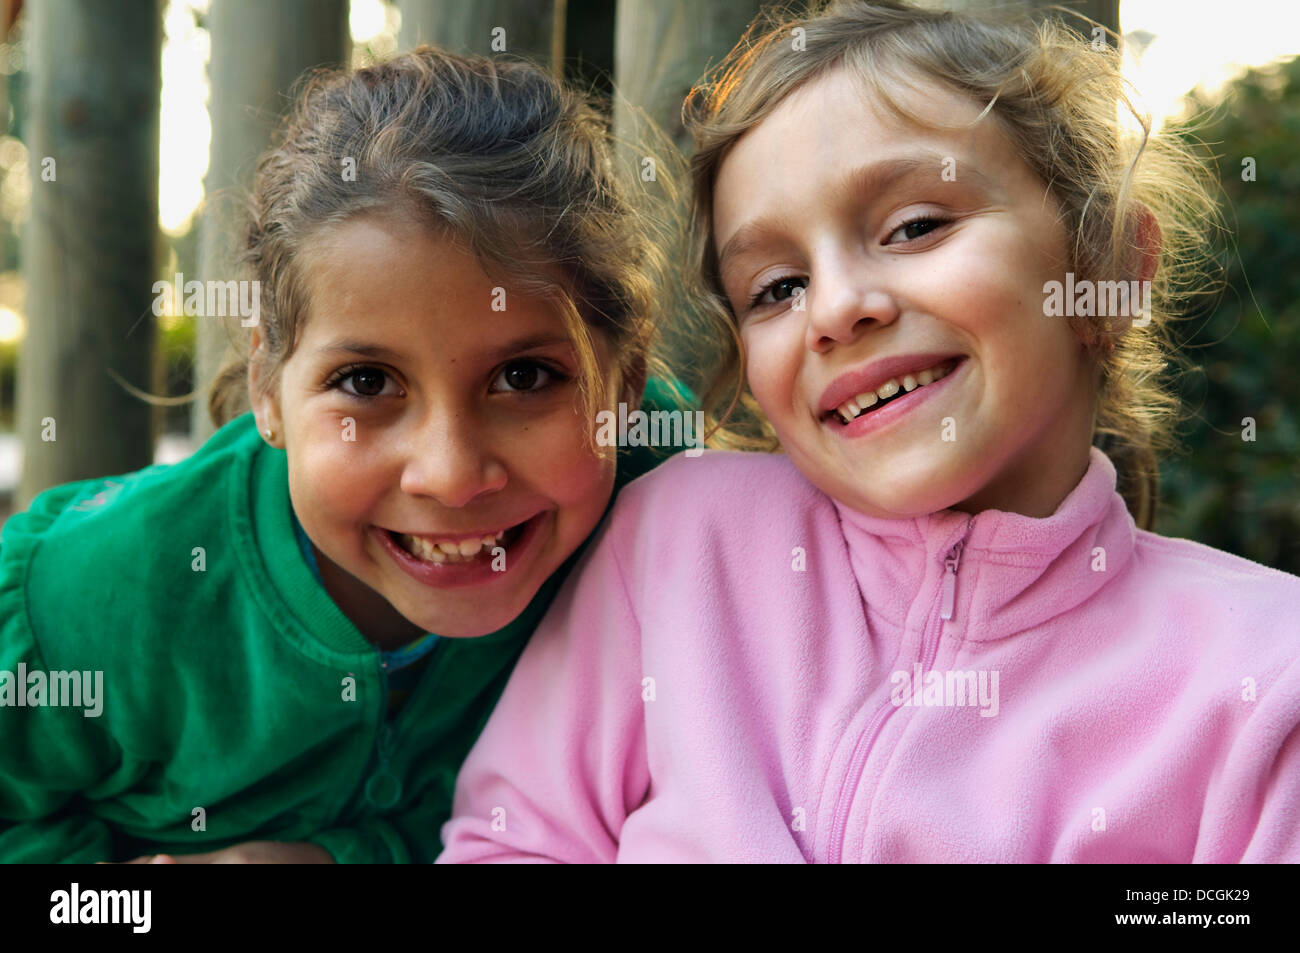 Portrait Of Two Girls Smiling Outdoors Stock Photo